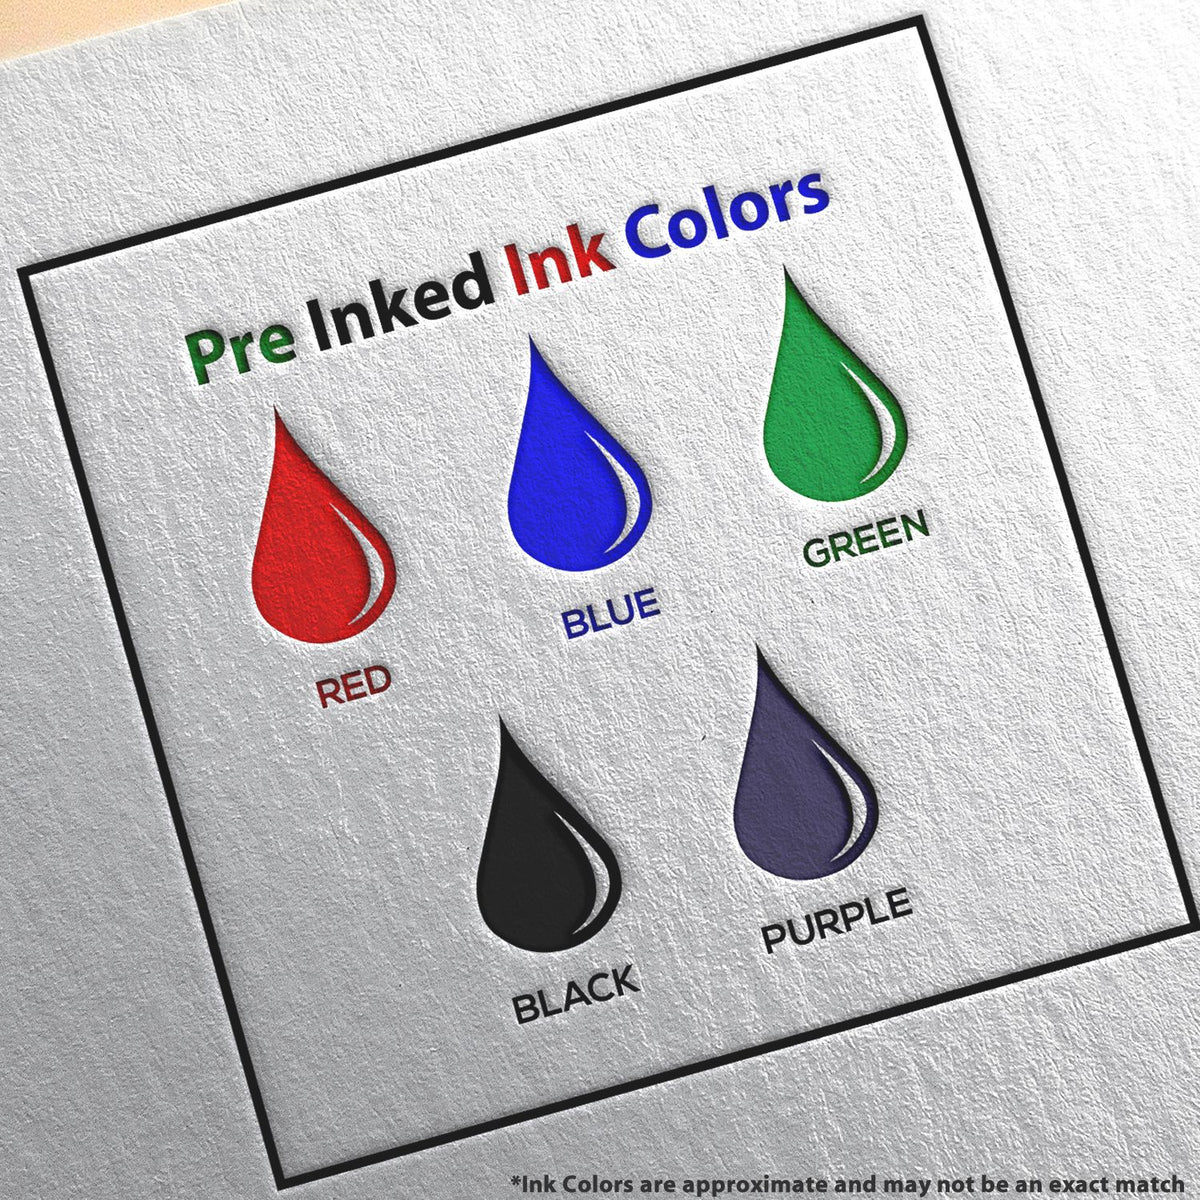 A picture showing the different ink colors or hues available for the Super Slim Oklahoma Notary Public Stamp product.